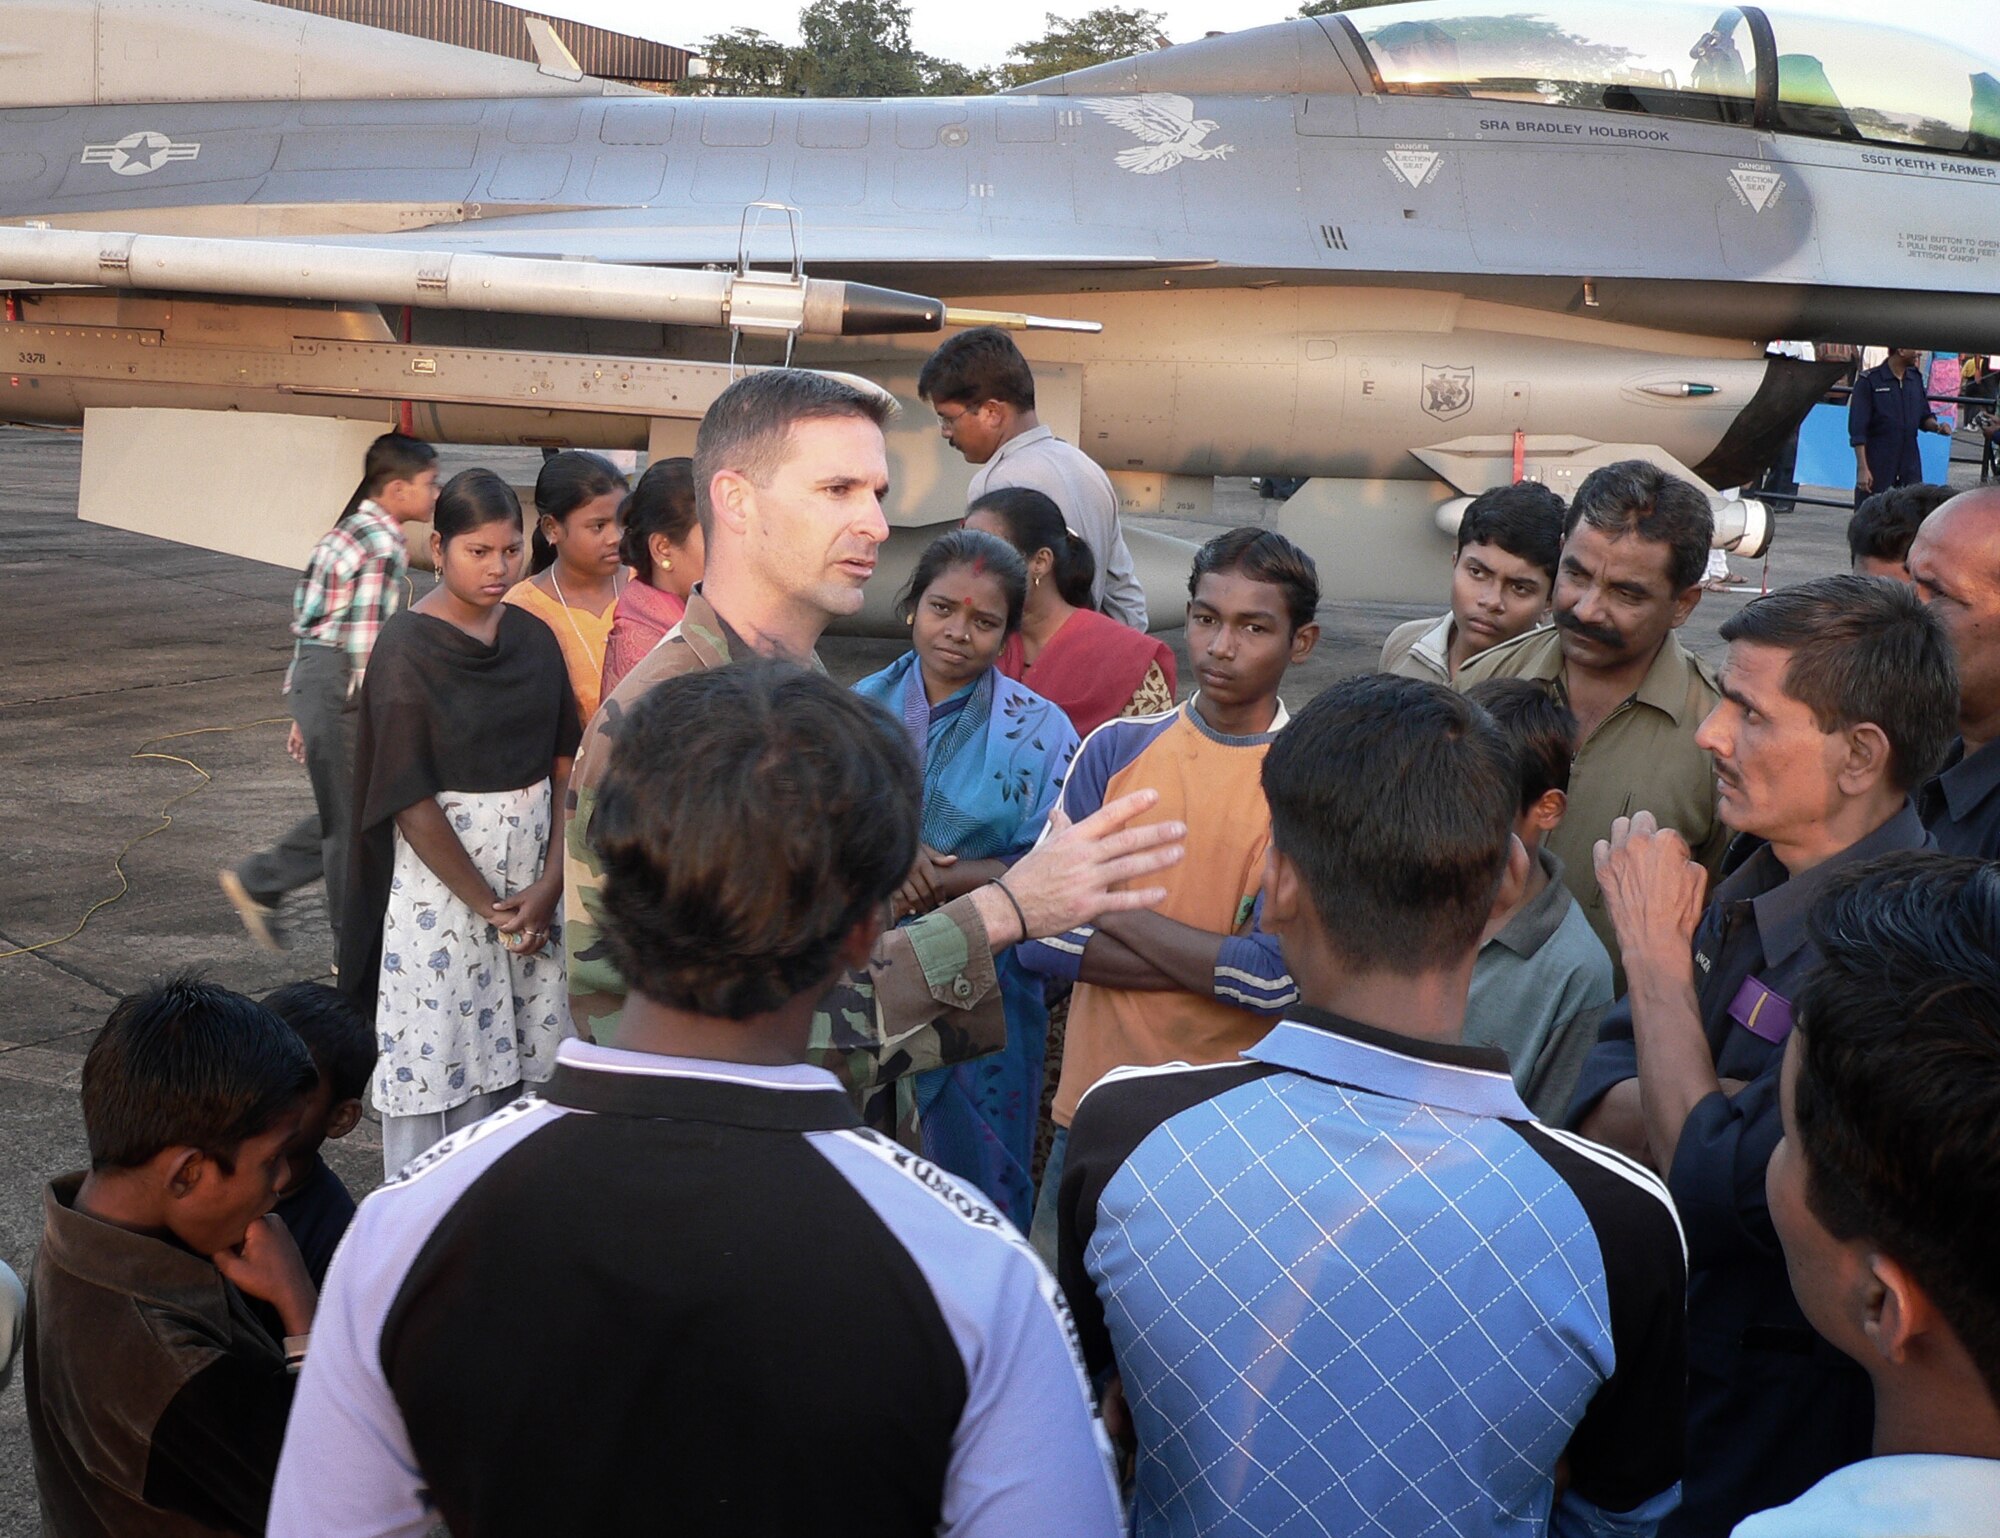 KALAIKUNDA AIR STATION, India (AFPN) -- Master Sgt. Dave Miller talks with local people who gathered to see displays of U.S. and Indian Air Force aircraft. Sergeant Miller is one of about 250 U.S. Airmen participating in the Cope India exercise. He is an aircraft section chief from Misawa Air Base, Japan. (U.S. Air Force photo by Capt. John Redfield)